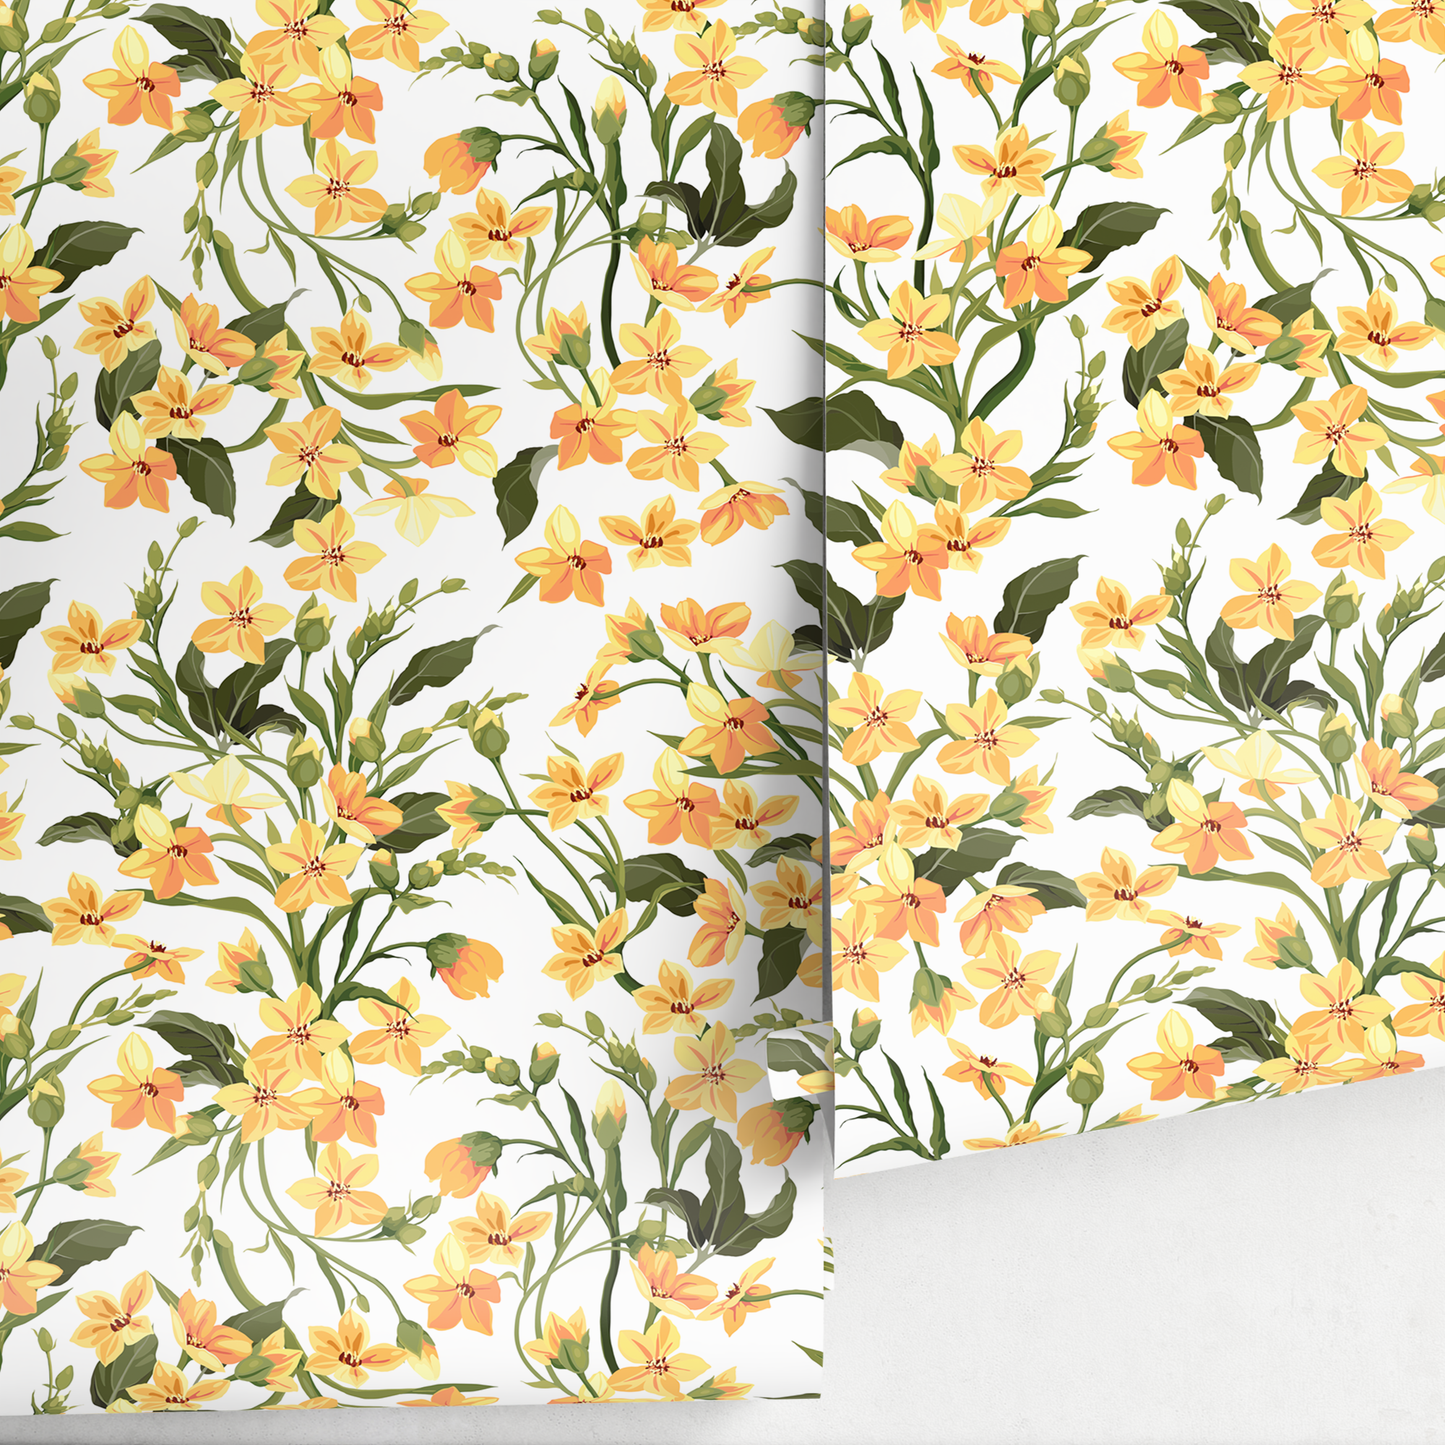 Wallpaper Peel and Stick Wallpaper Removable Wallpaper Home Decor Wall Art Wall Decor Room Decor / Cute Yellow Flowers Wallpaper - A121